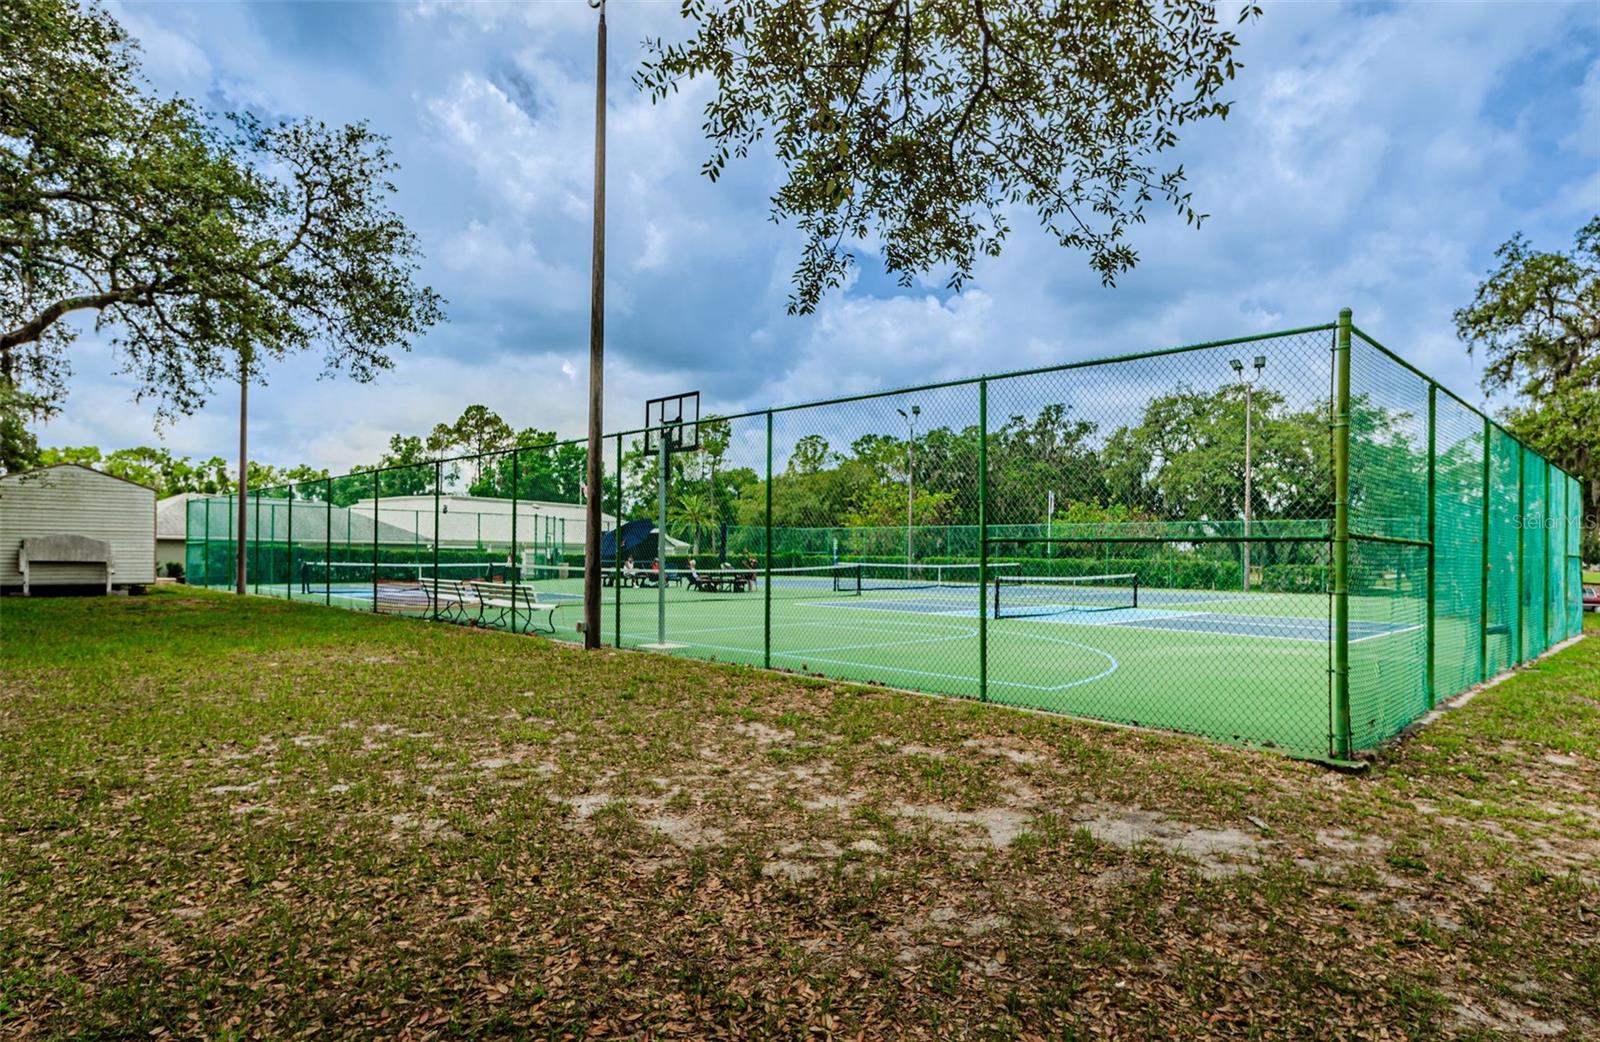 Meadow Oaks tennis and pickleball courts